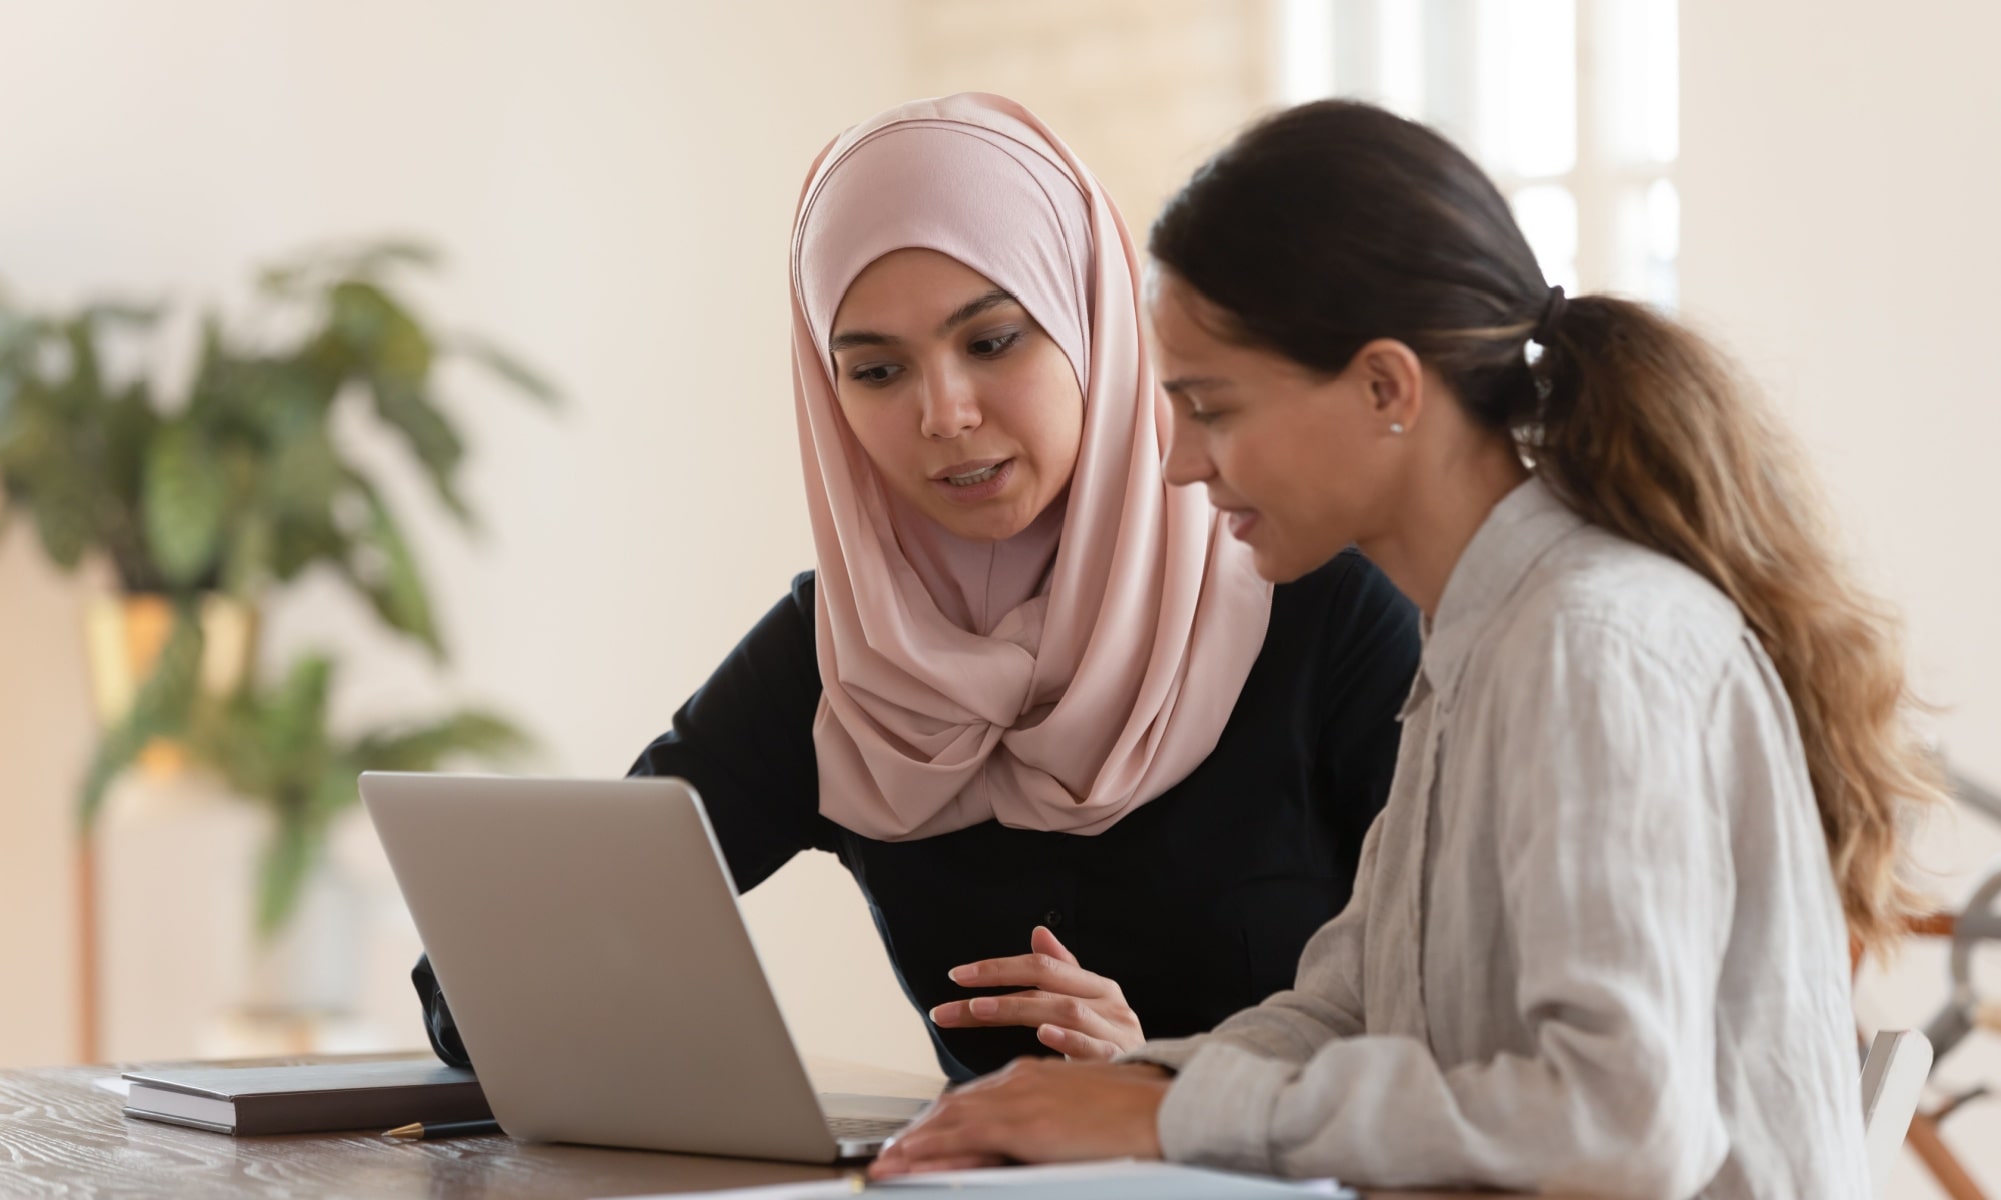 2 women learning on a laptop together